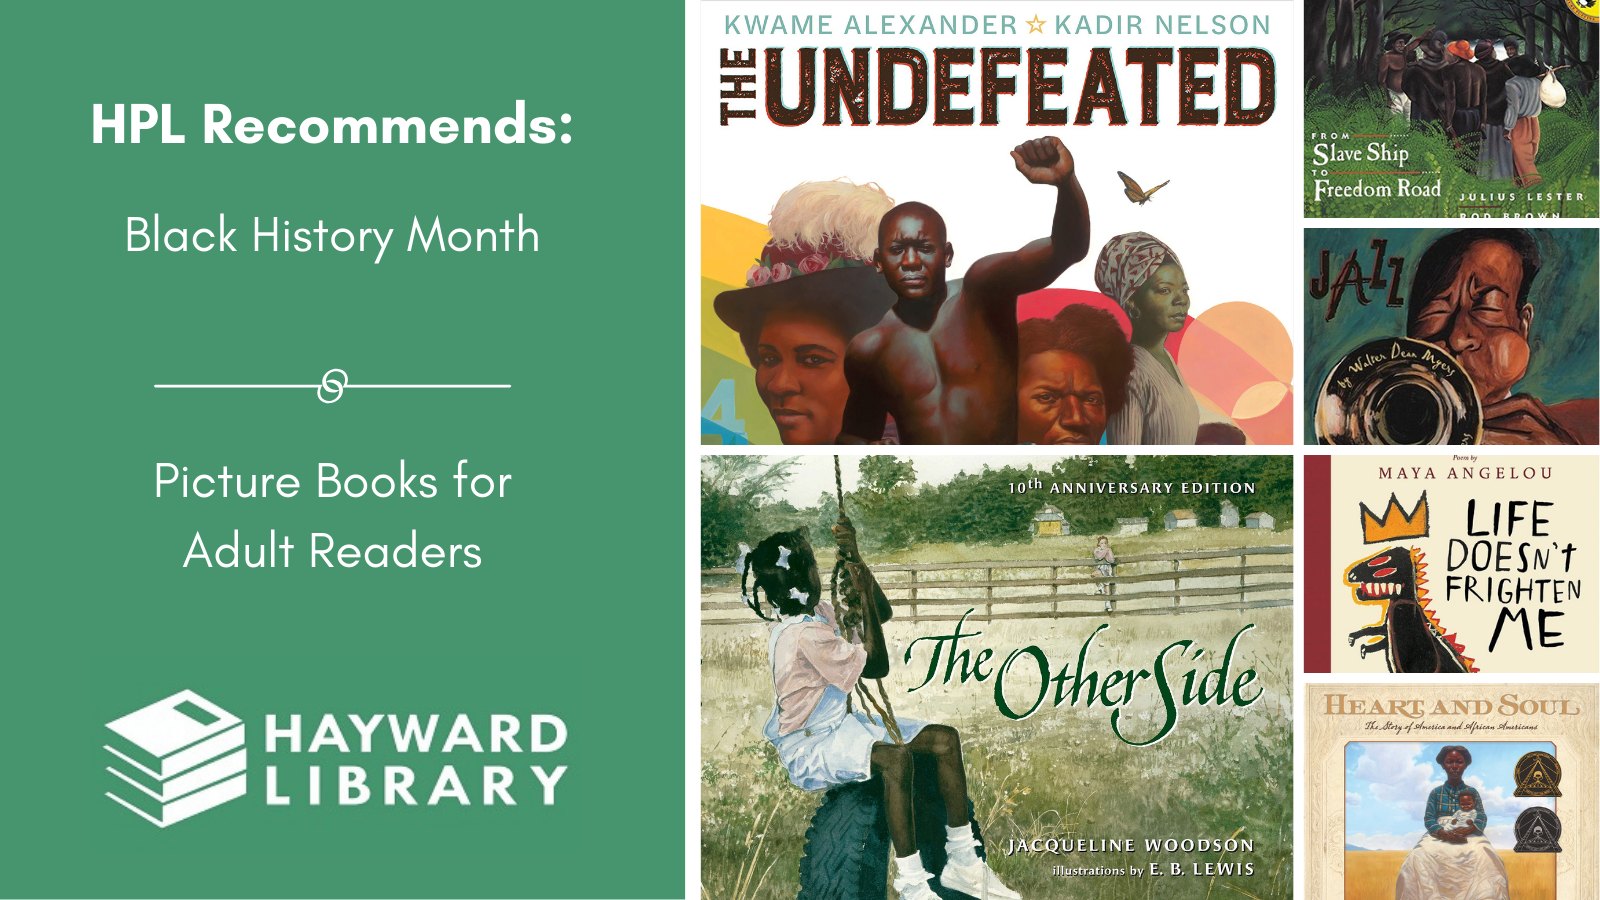 Collage of book covers with a green block on left side that says HPL Recommends, Black History Month, Picture Books for Adult Readers in white text, with Hayward Library logo below it.